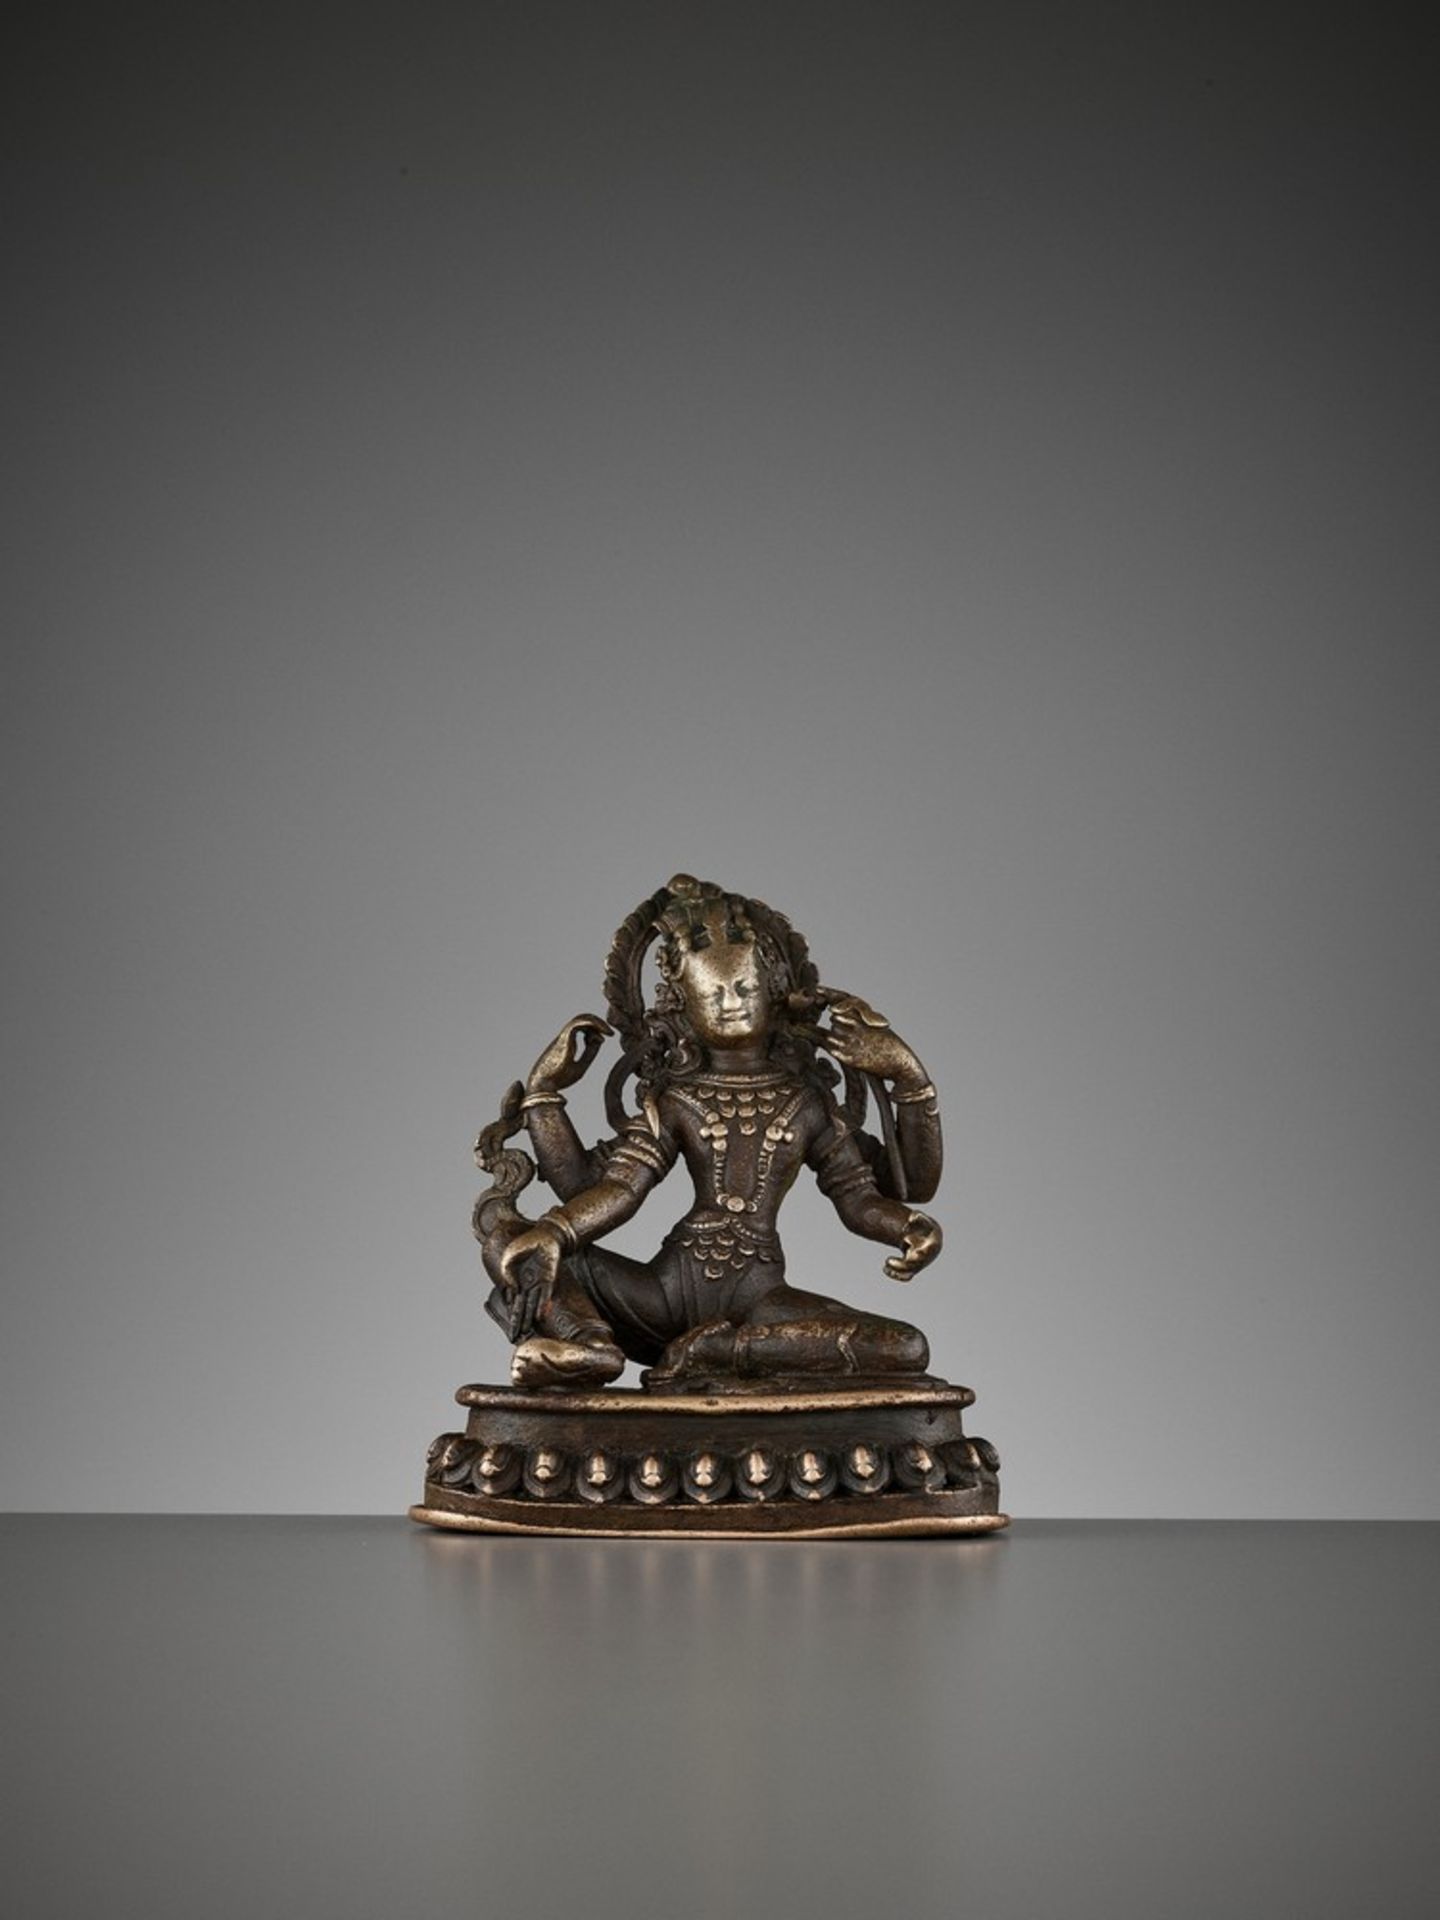 A SMALL BRONZE OF THE FOUR-ARMED AVALOKITESVARA, 15TH-16TH CENTURY - Image 10 of 11